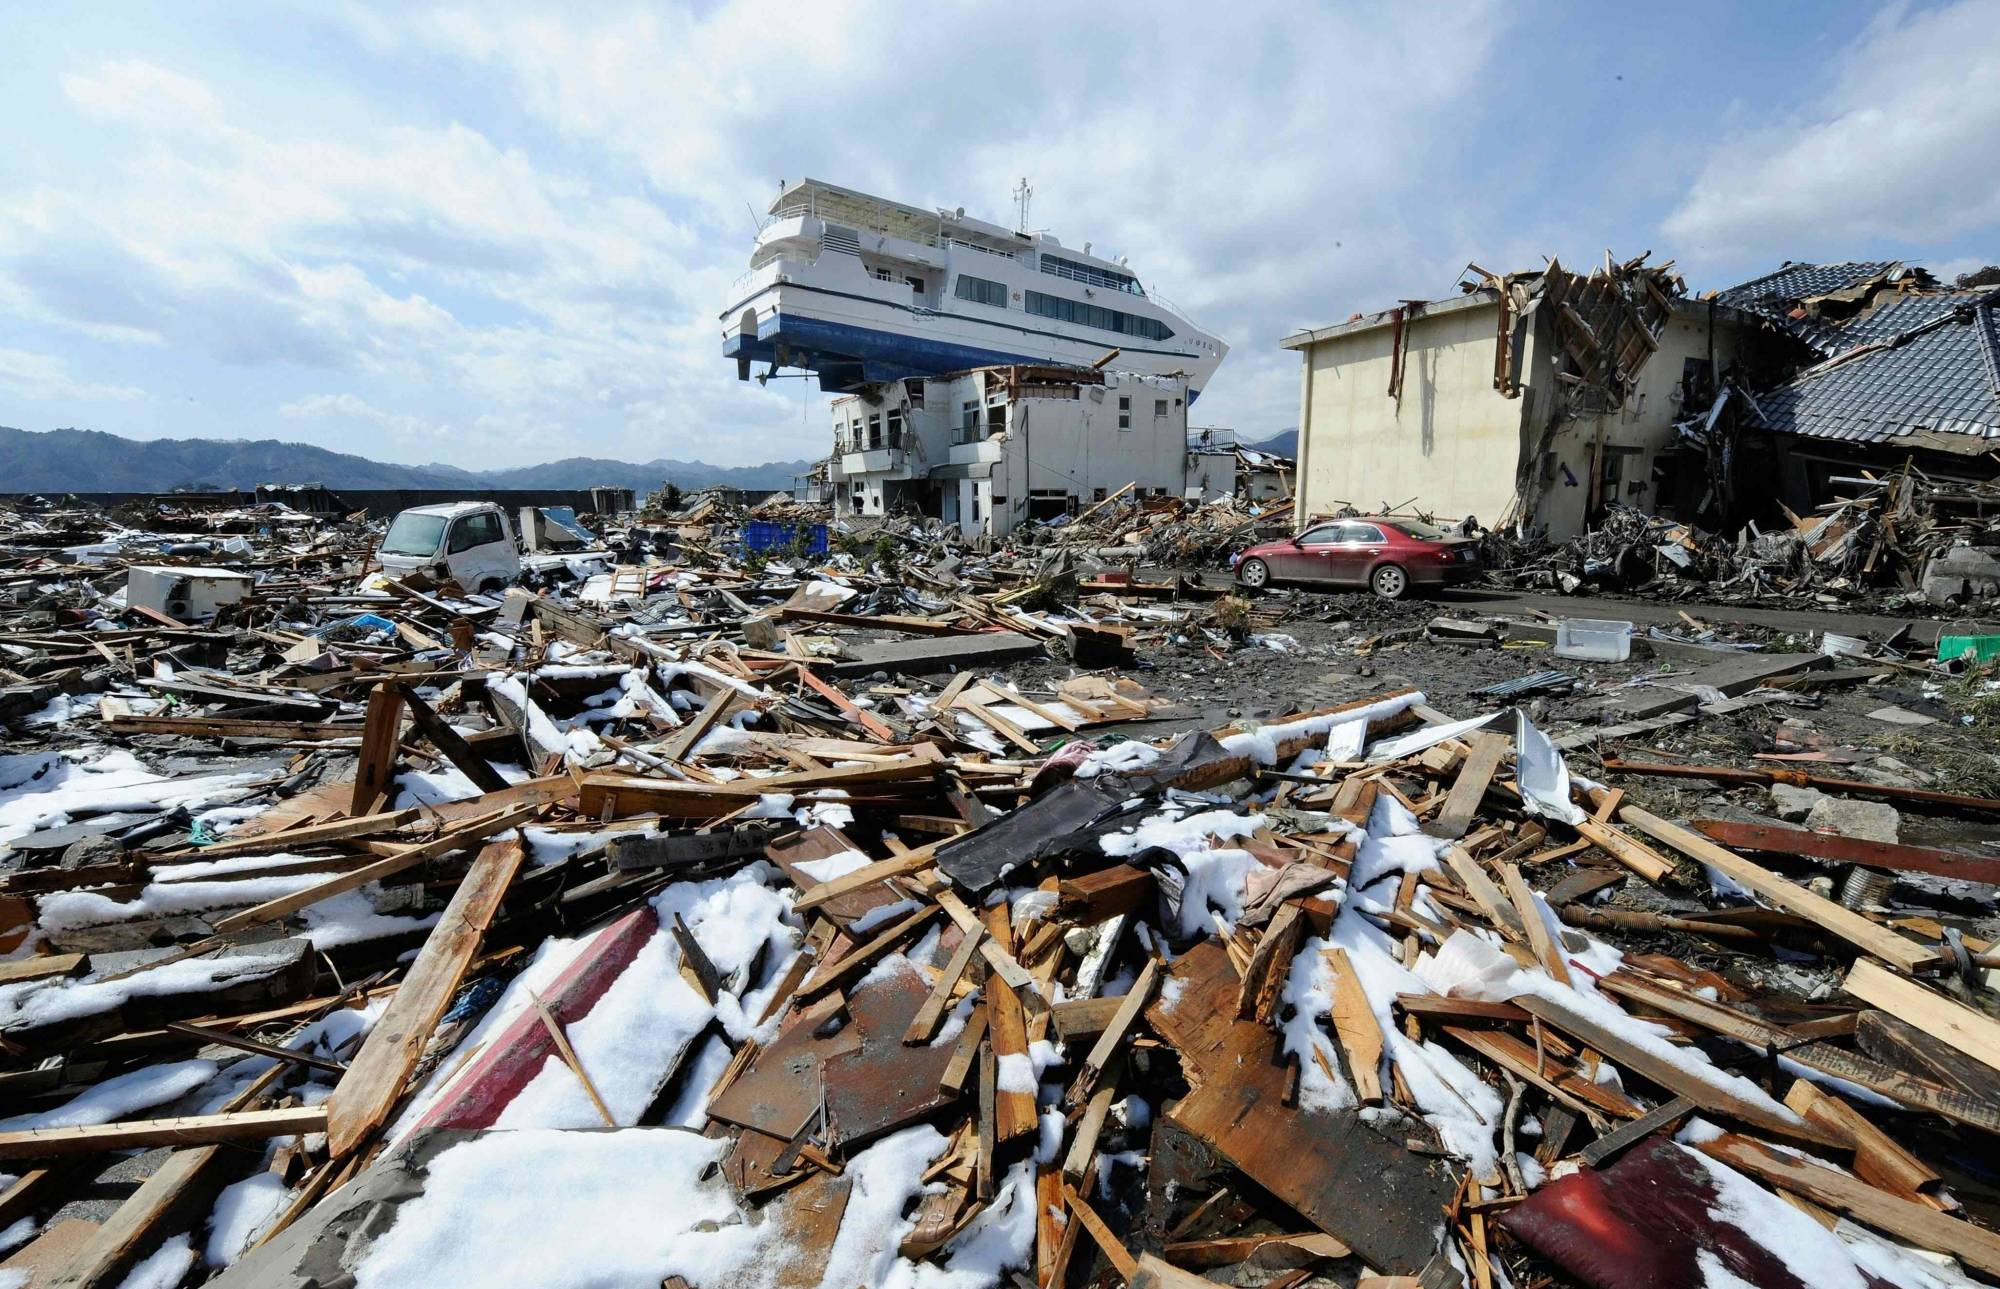 A ship washed ashore by the March 2011 tsunami rests on a two-story building in Otsuchi, Iwate Prefecture in April that year. | AFP-JIJI